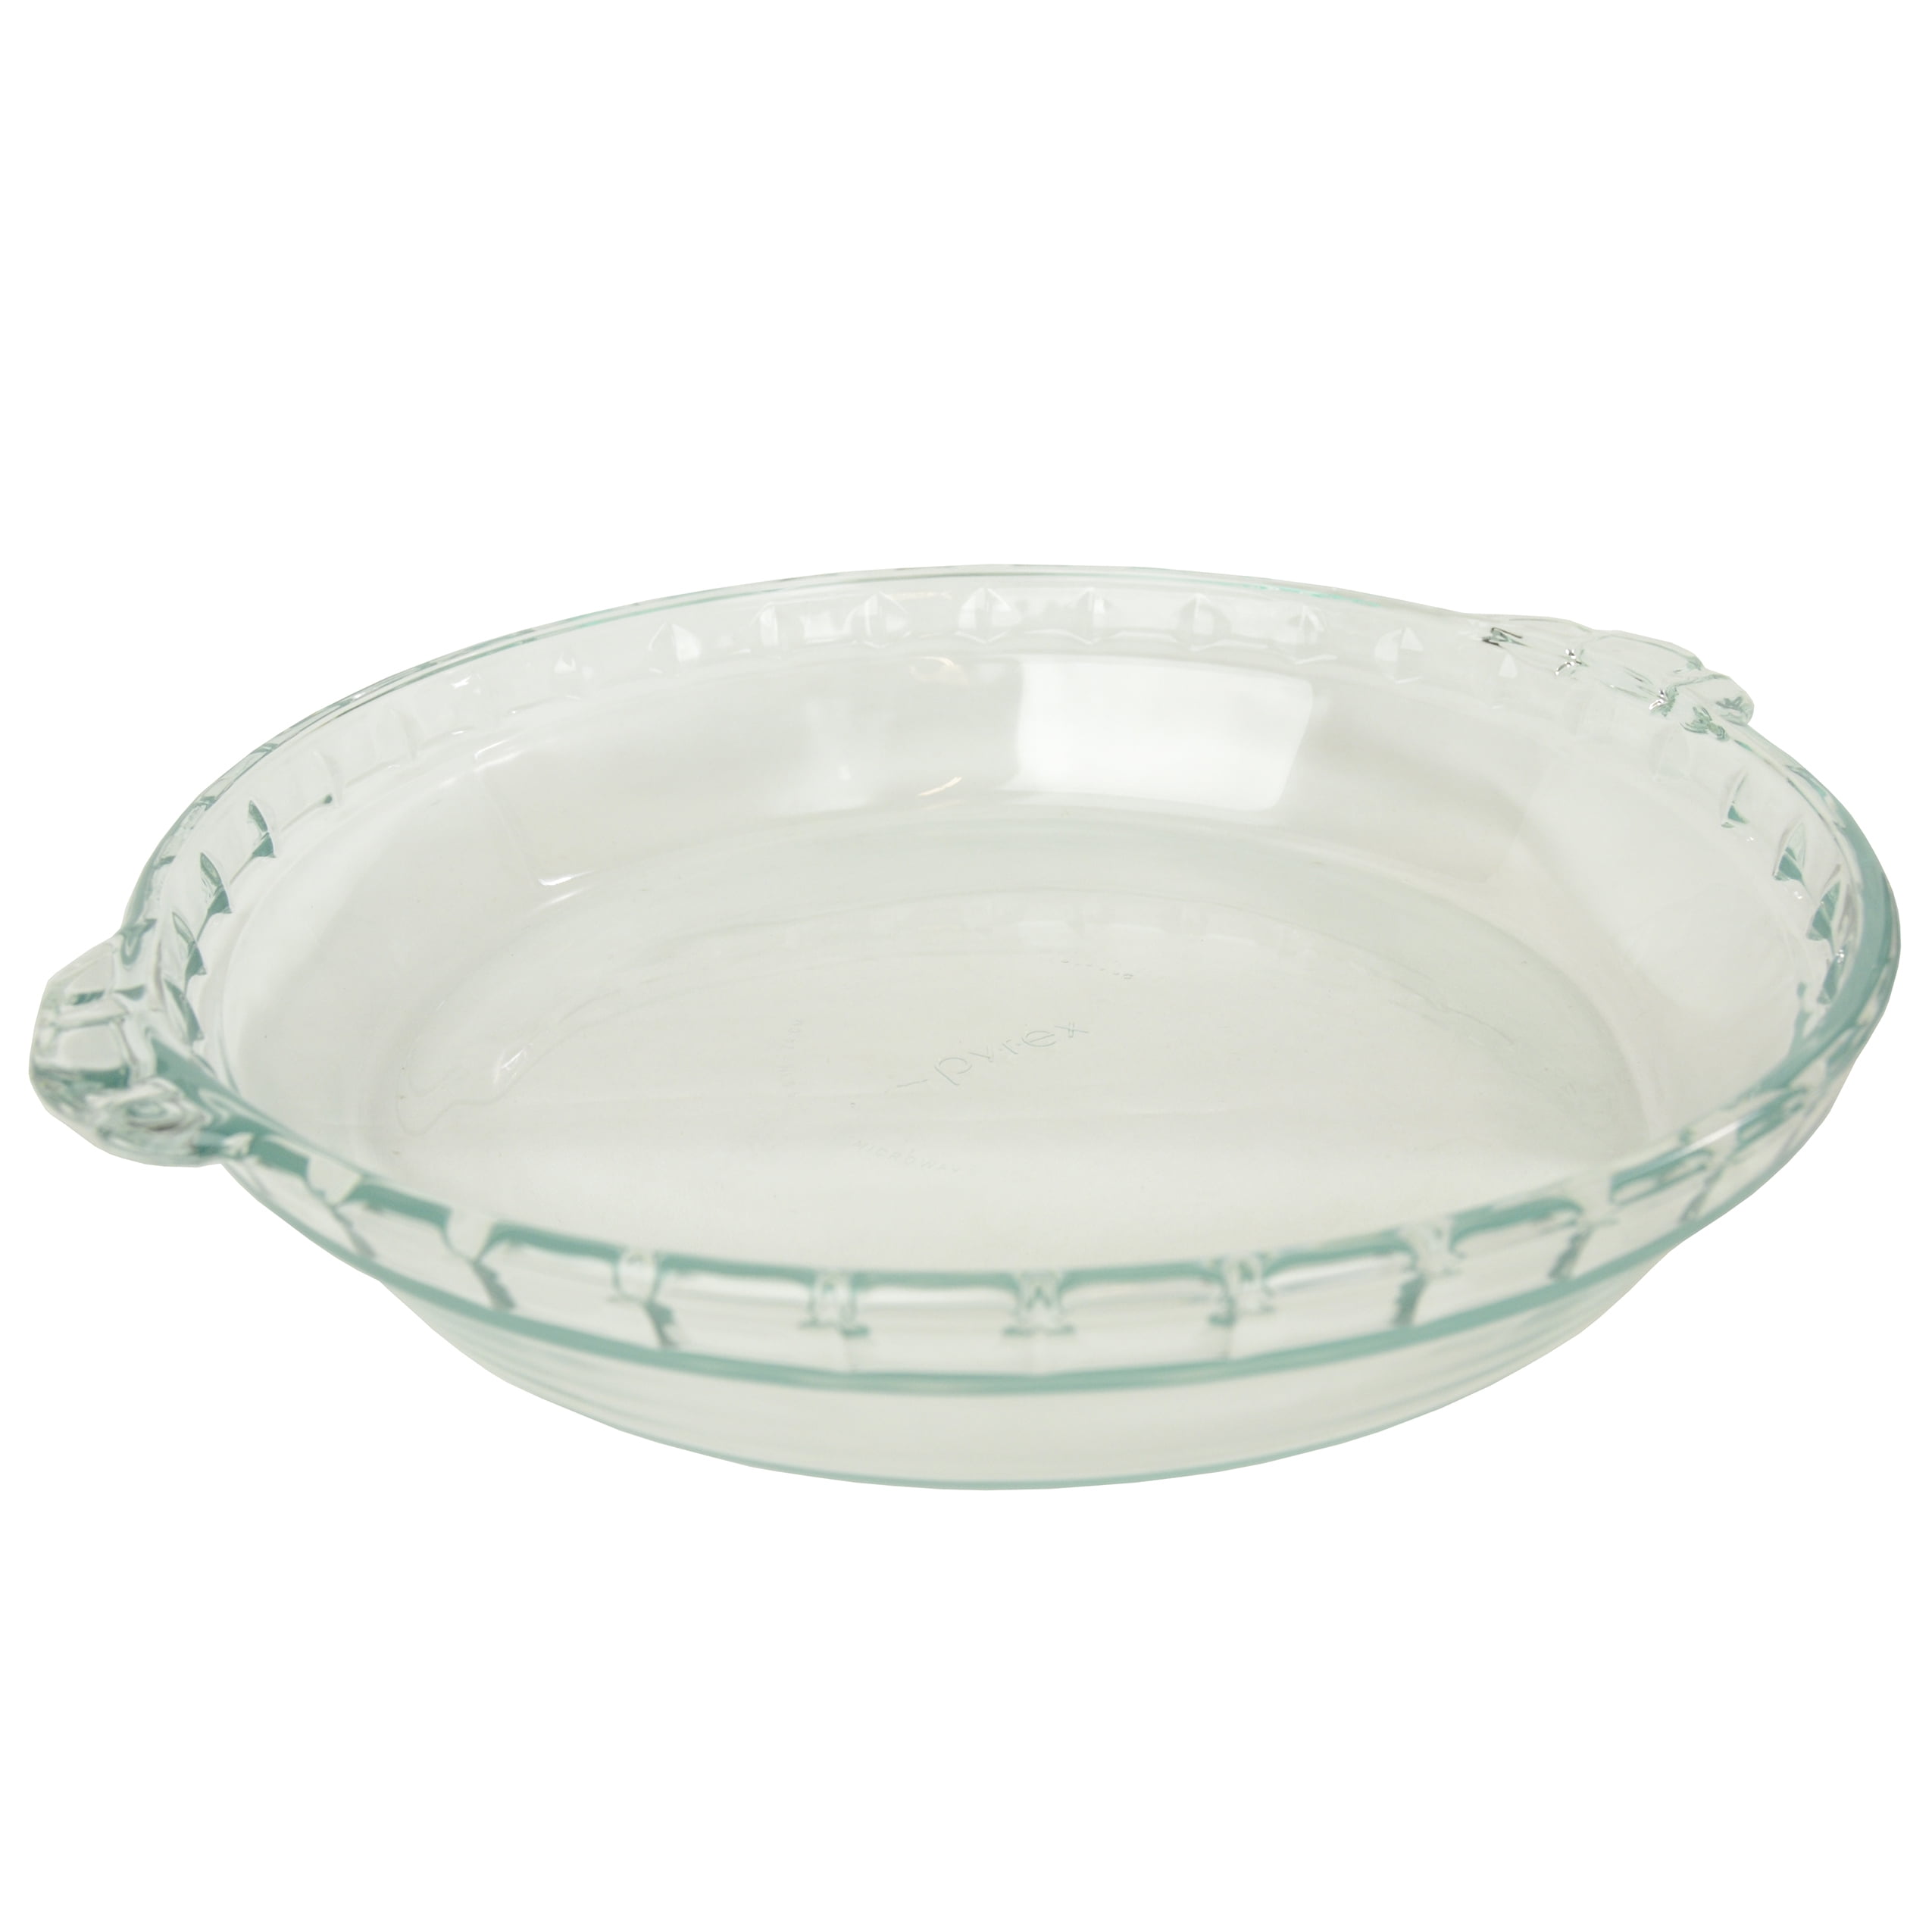 U. S. Glass Co. Pink SLICK HANDLE Two-Spout MIXING BOWL (item #1408132)